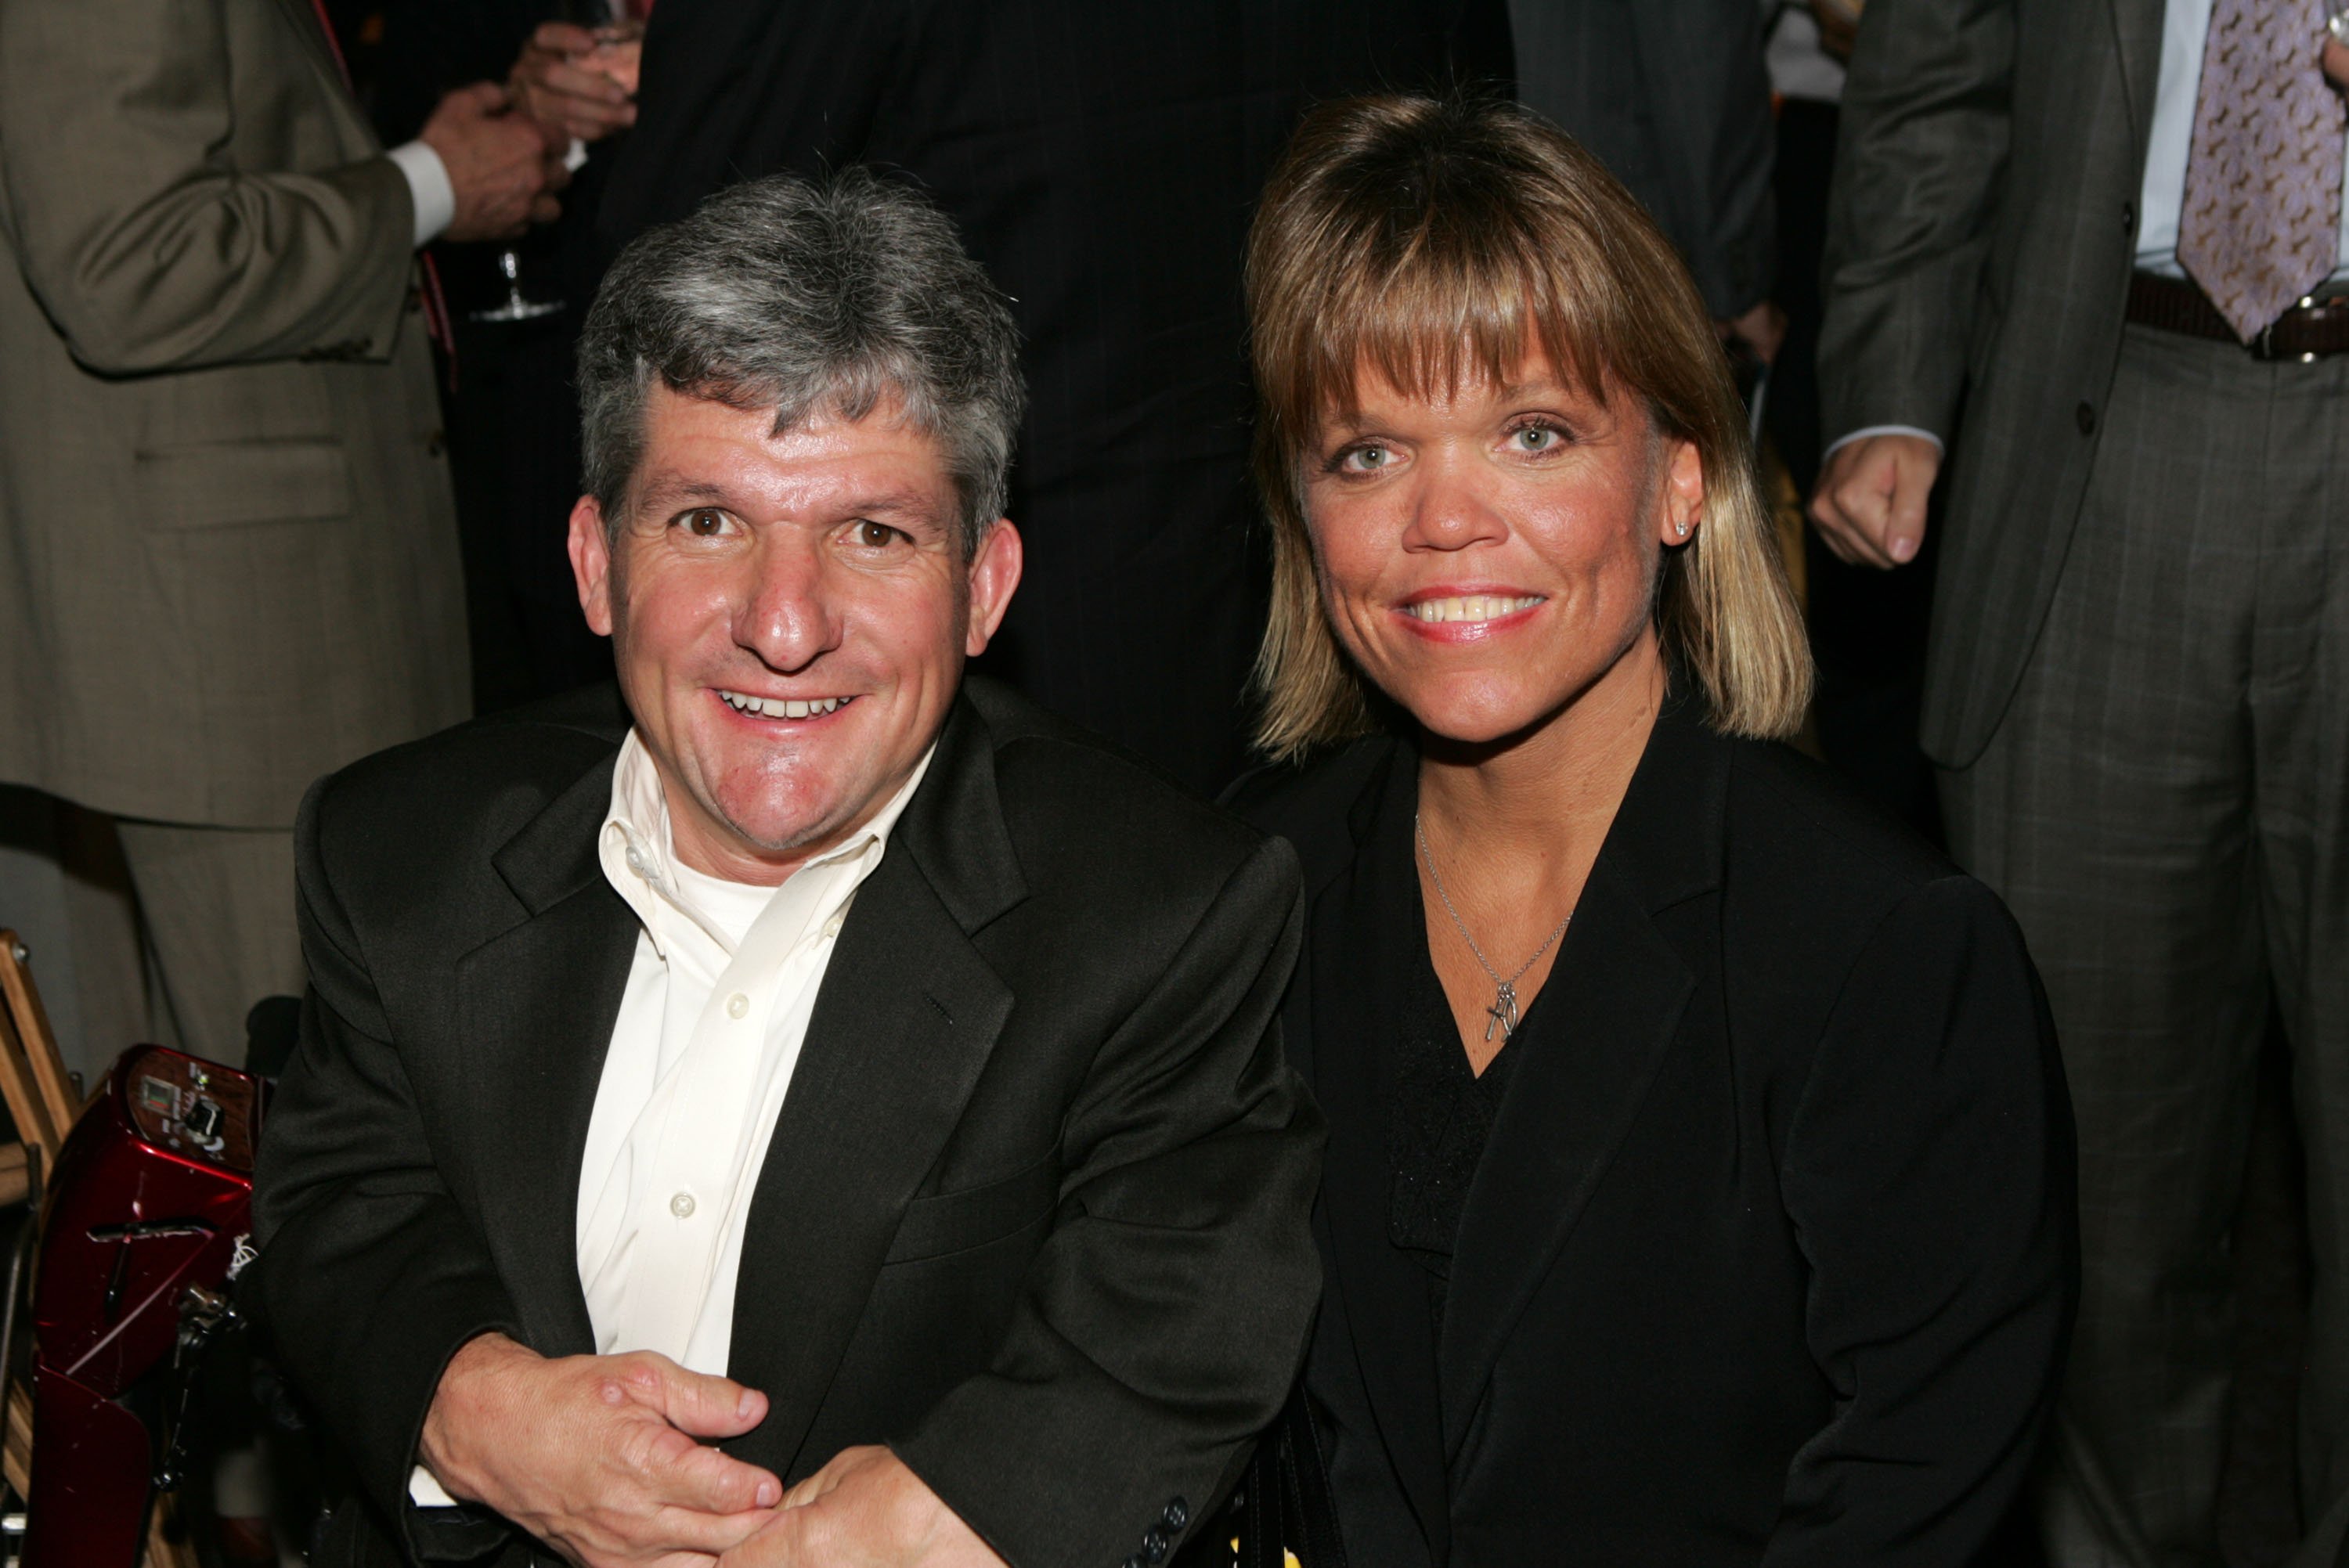 Matt and Amy Roloff attend the Discovery Upfront Presentation NY - Talent Images on April 23, 2008, in New York City. | Source: Getty Images.